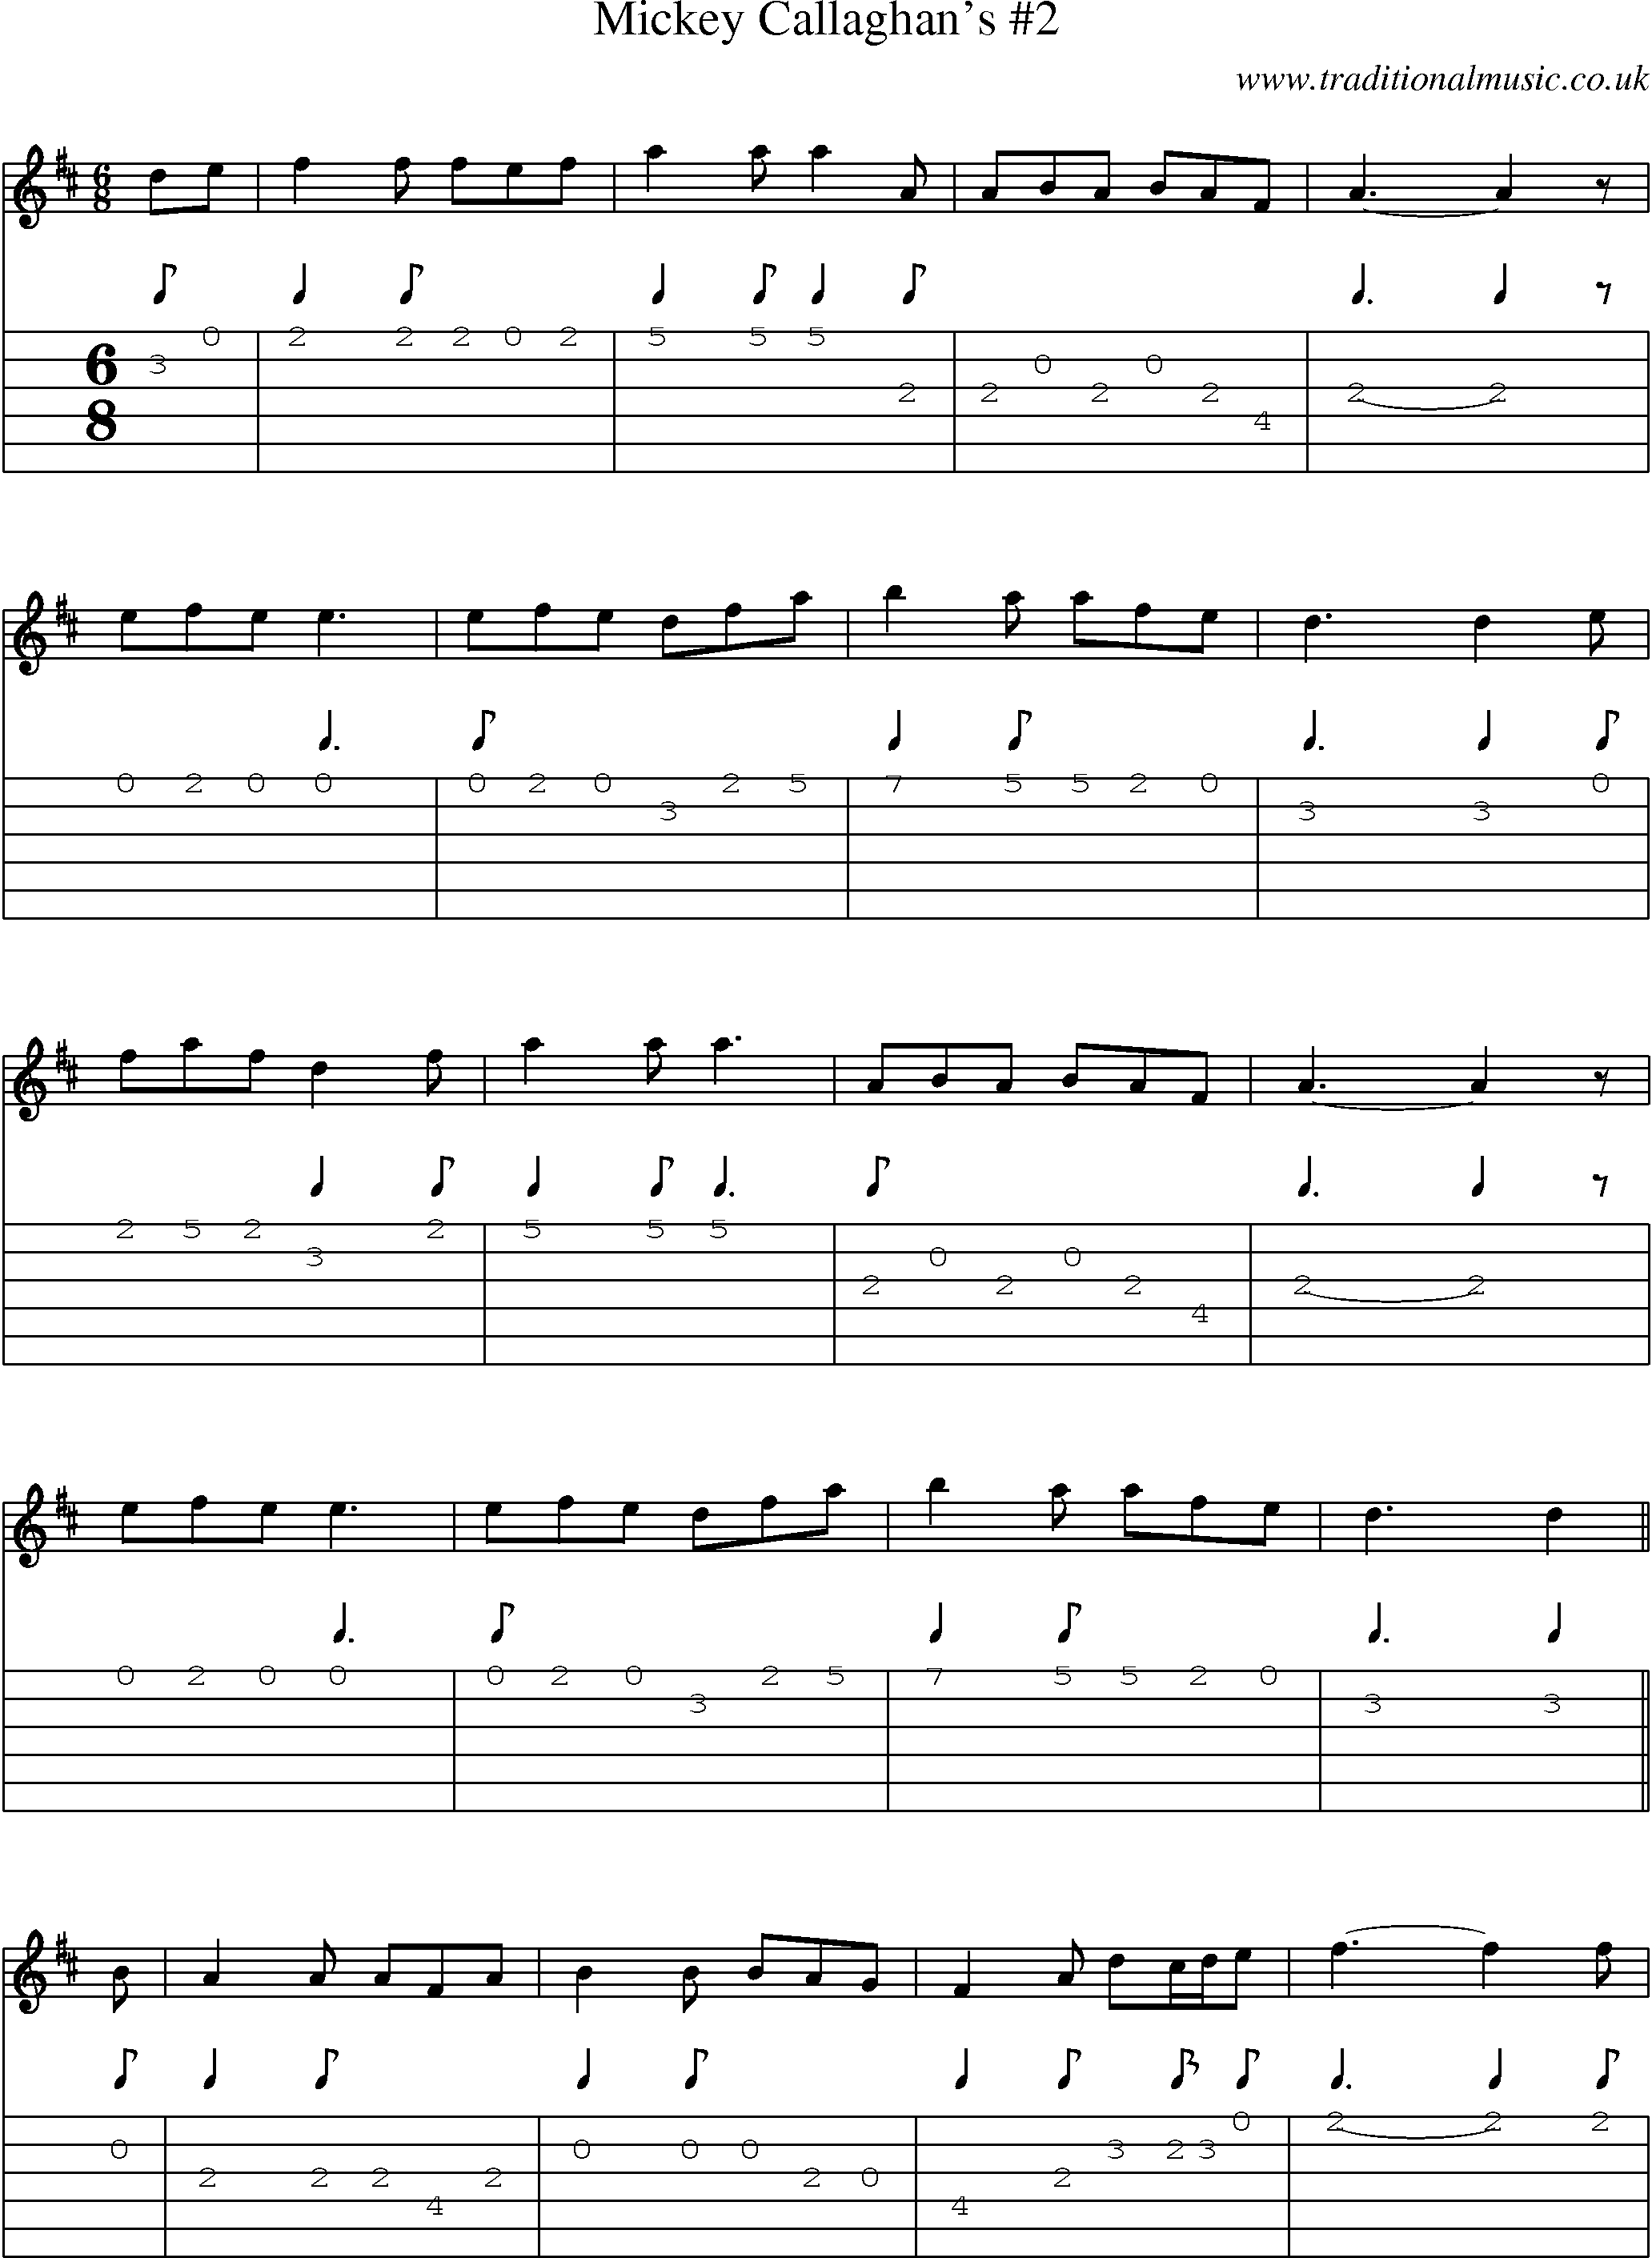 Music Score and Guitar Tabs for Mickey Callaghans 2